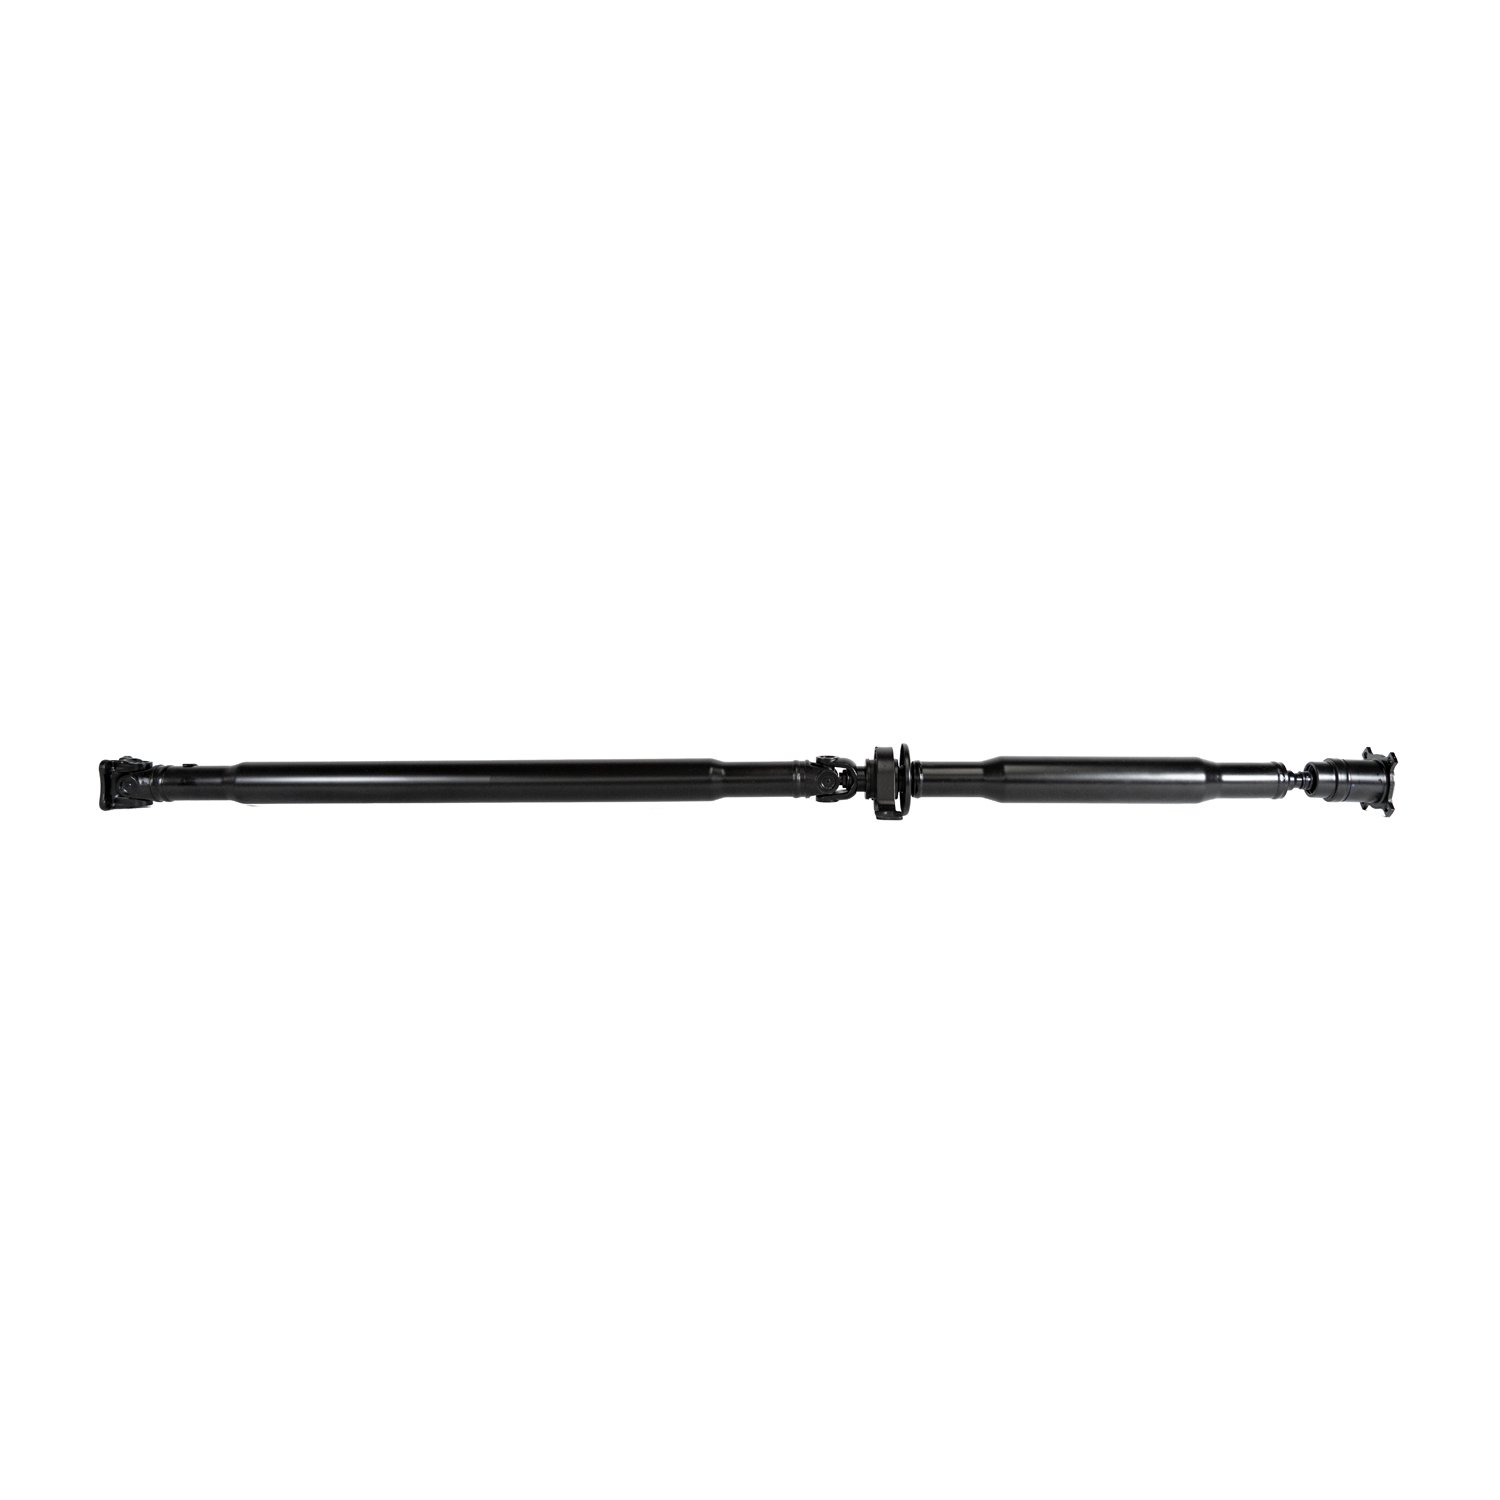 USA Standard 44653 Rear Driveshaft, For Ford Edge/Lincoln Mkx, 80.5 in. Flange To Flange